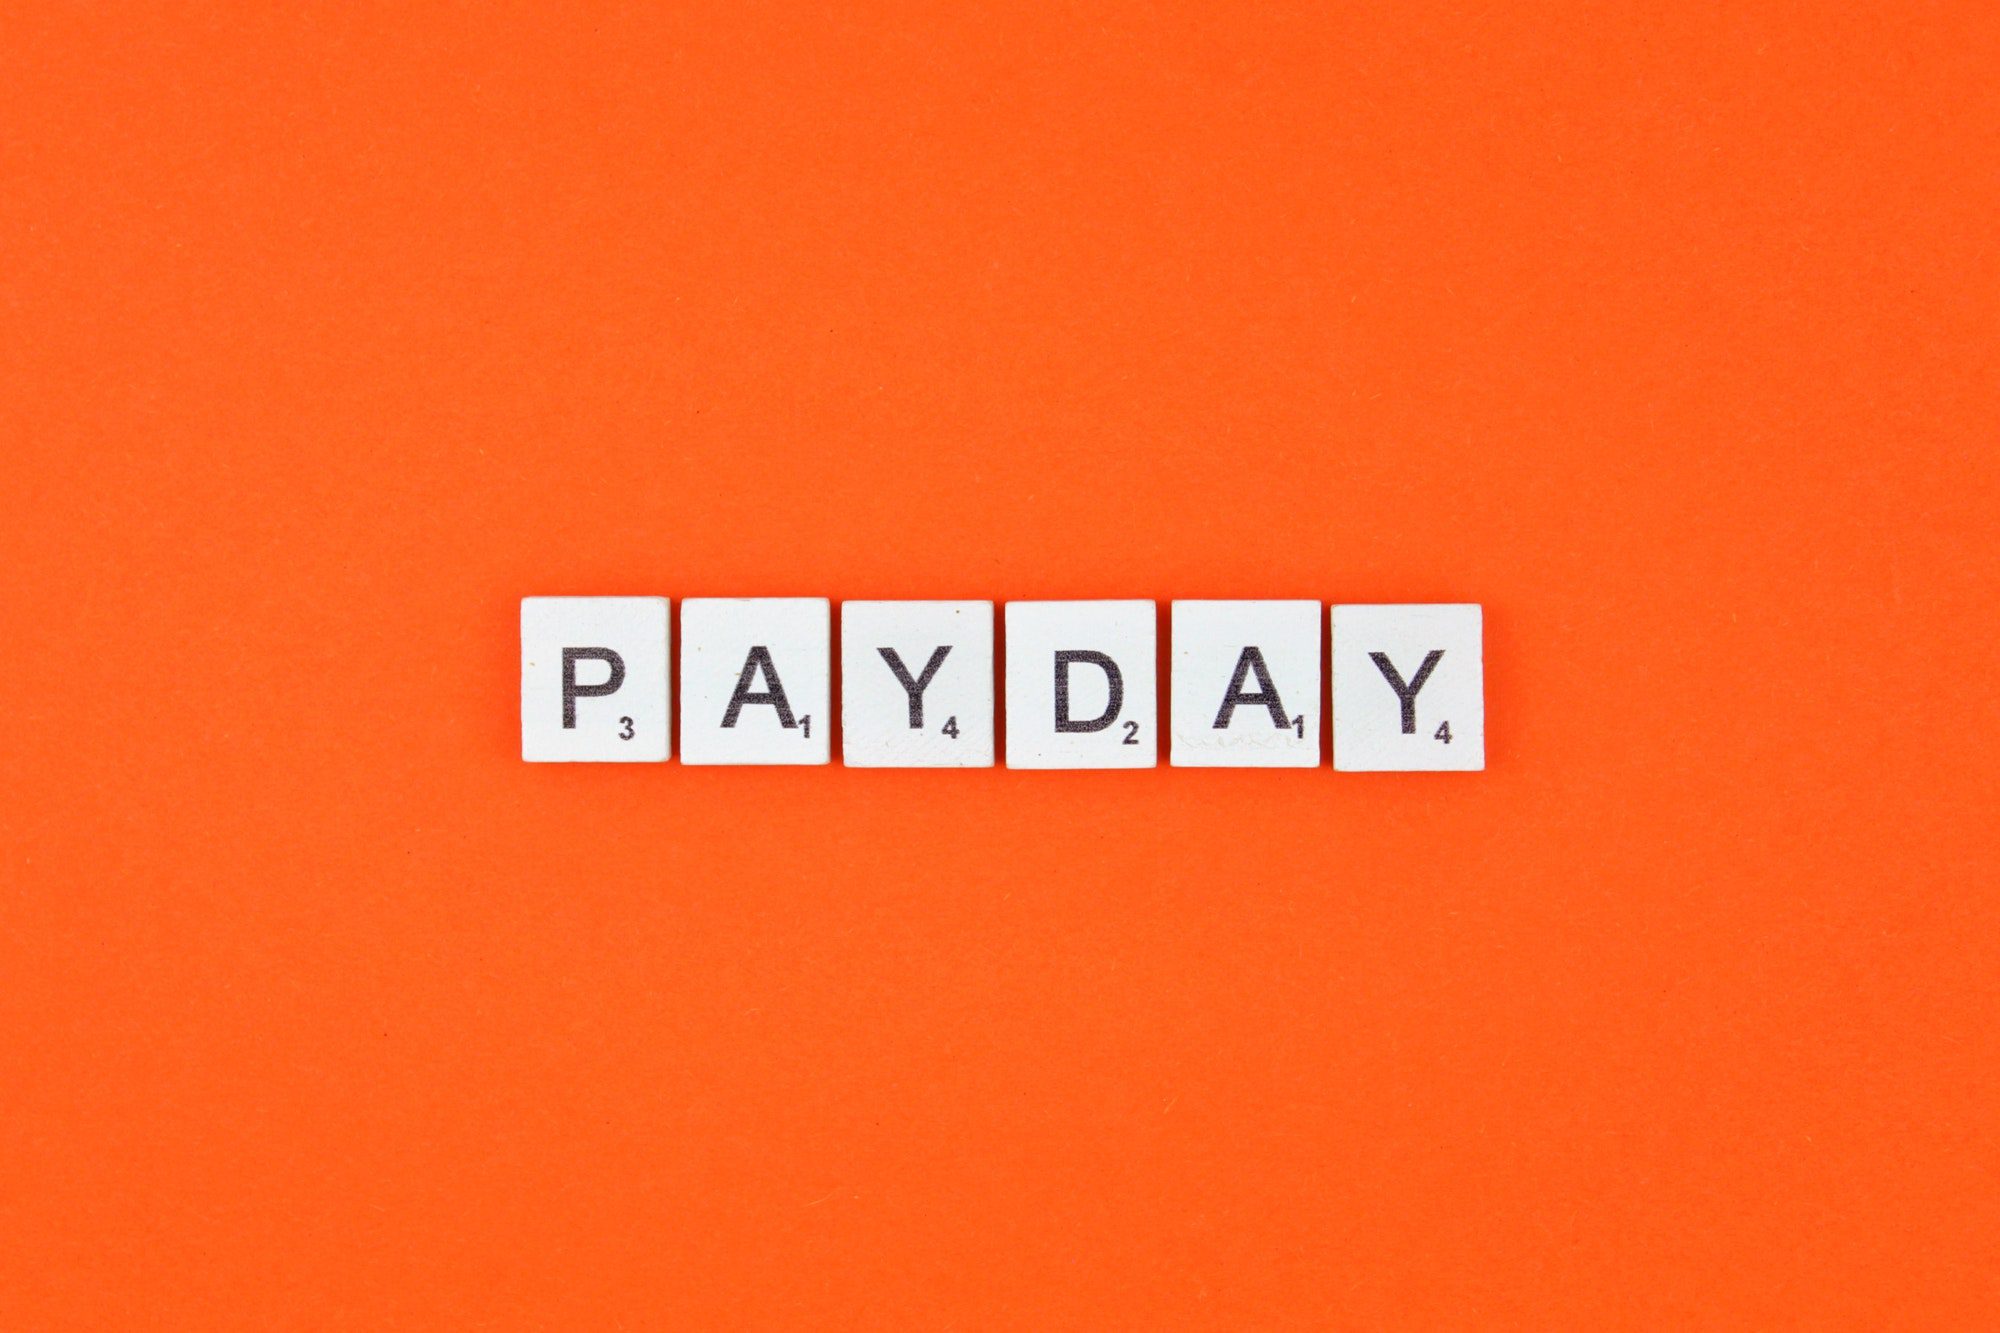 Payday scrabble letters word on an orange background referencing How are Insurance agents paid.